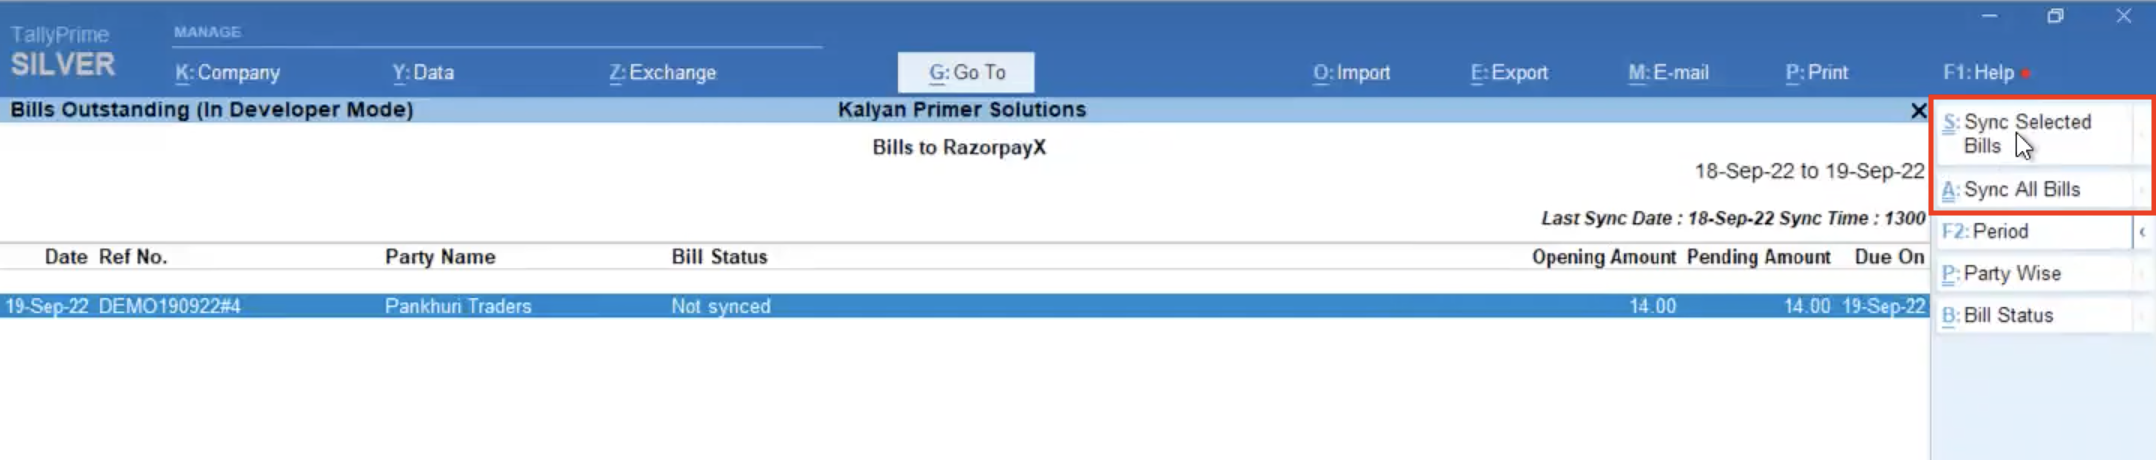 Sync a specific bill from the duration or sync all bills